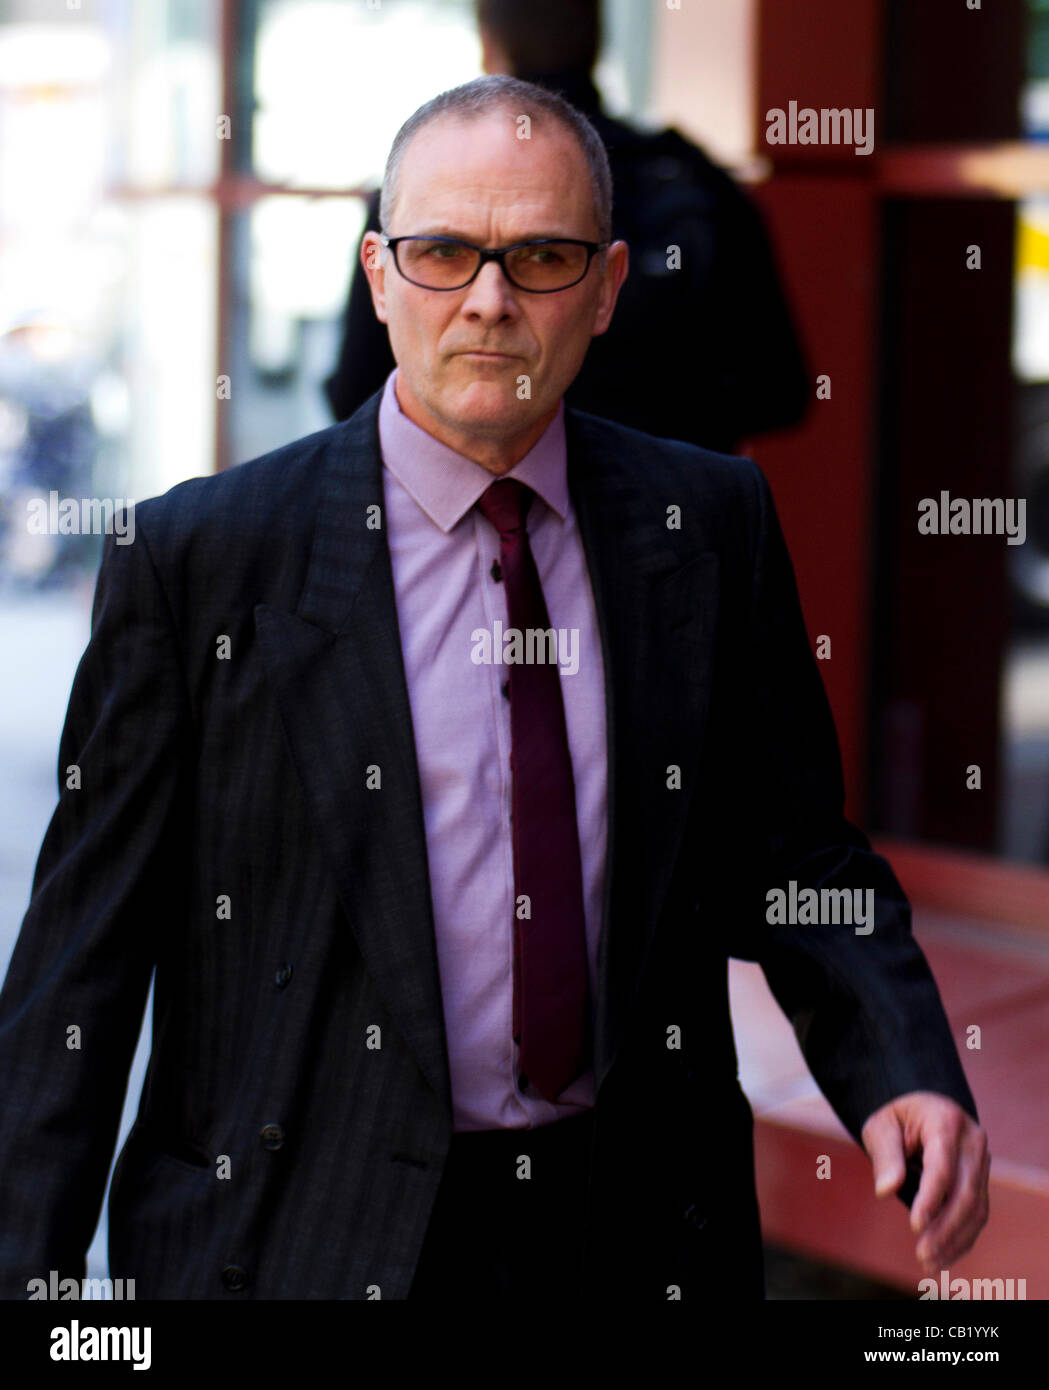 London, UK. 22nd May 2012. PC Alex MacFarlane leaves Westminster Magistrates Court, London. PC Alex MacFarlane allegedly racially abused a black man during last summer's riots.PLEASE NOTE NAME SPELLING HAS BEEN CORRECTED FROM PREVIOUS. Stock Photo